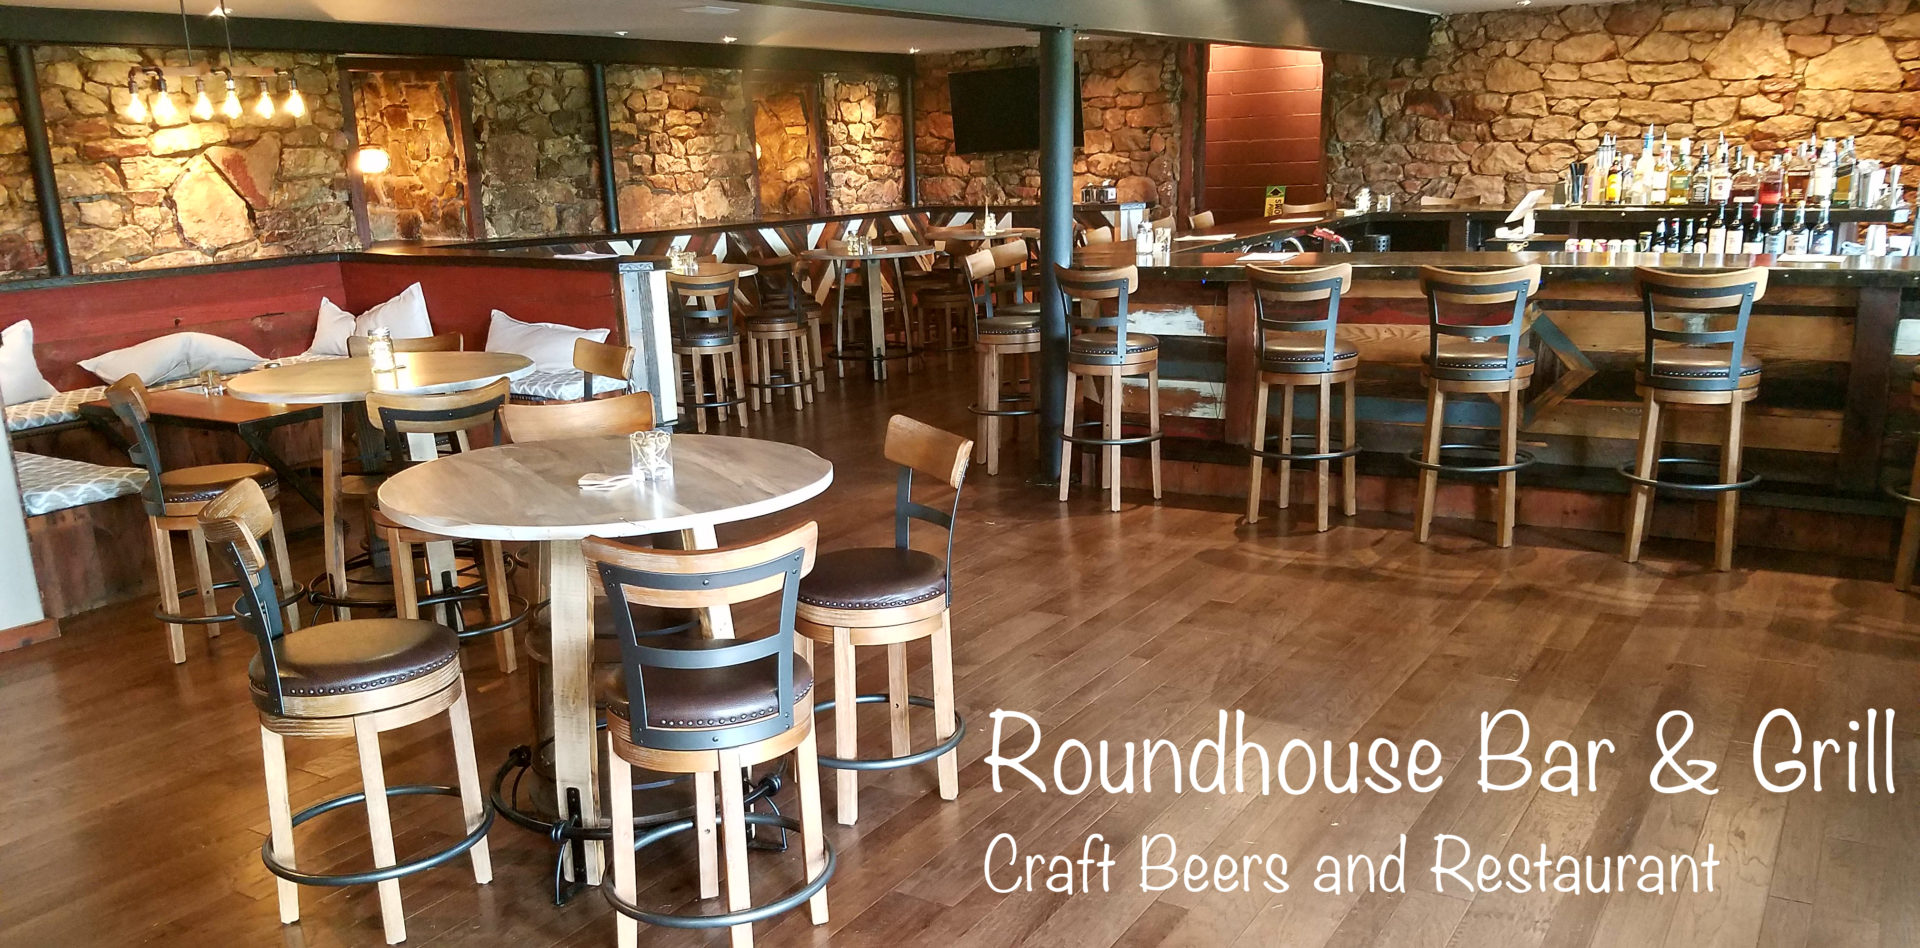 Roundhouse Bar and Grill